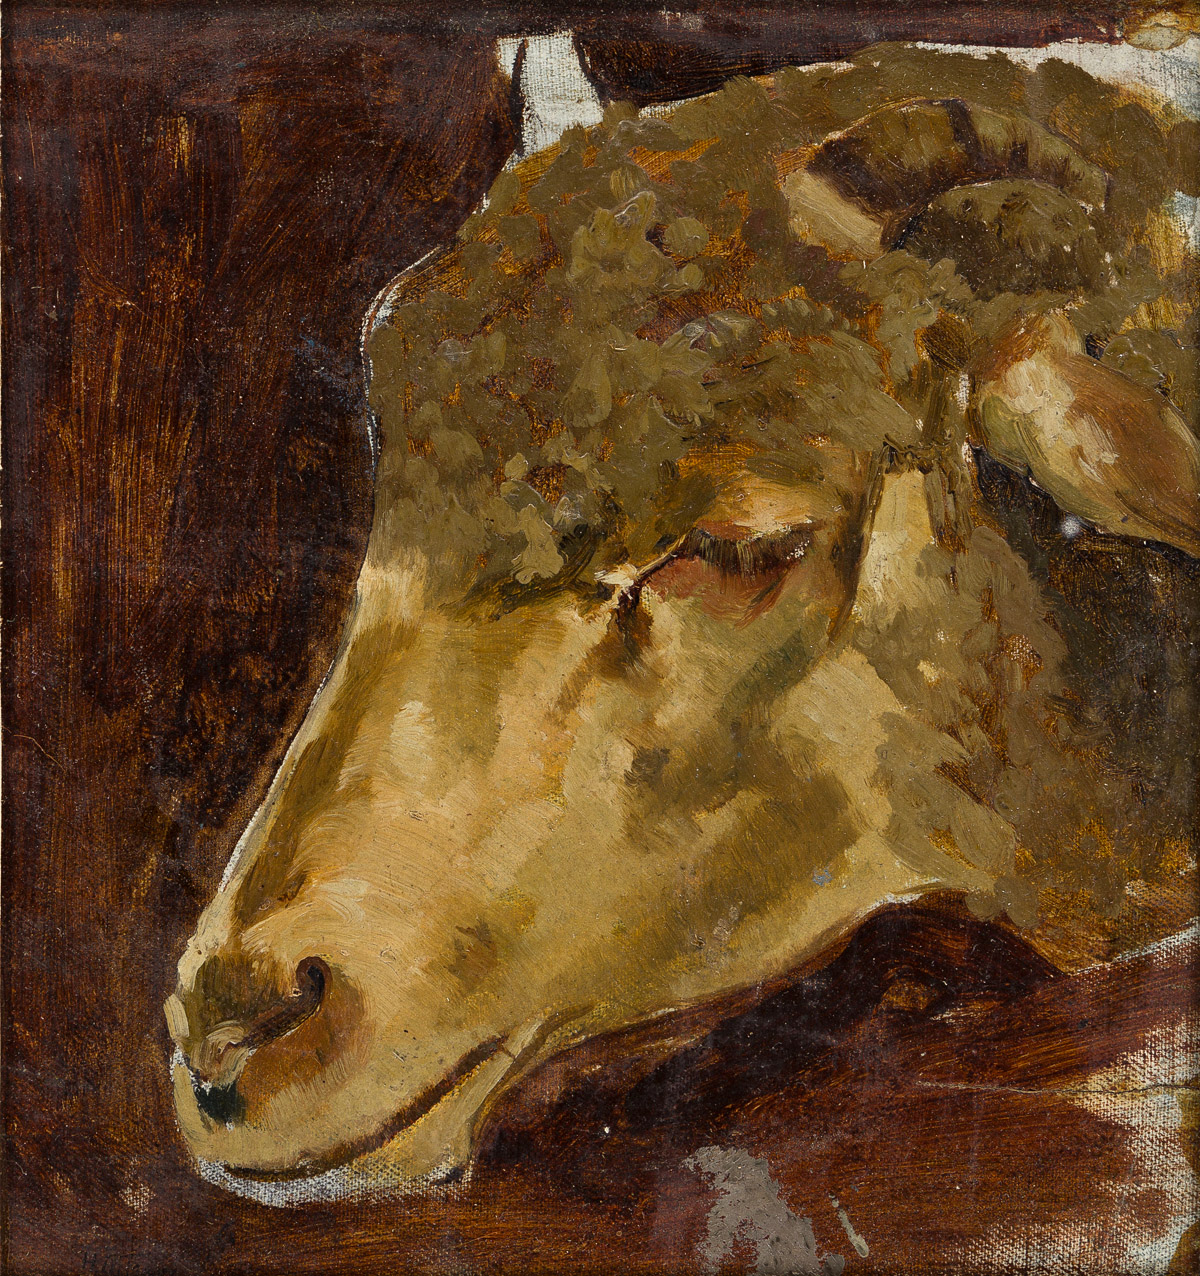 HENRY OSSAWA TANNER (1859 - 1937) Head of a Sheep.